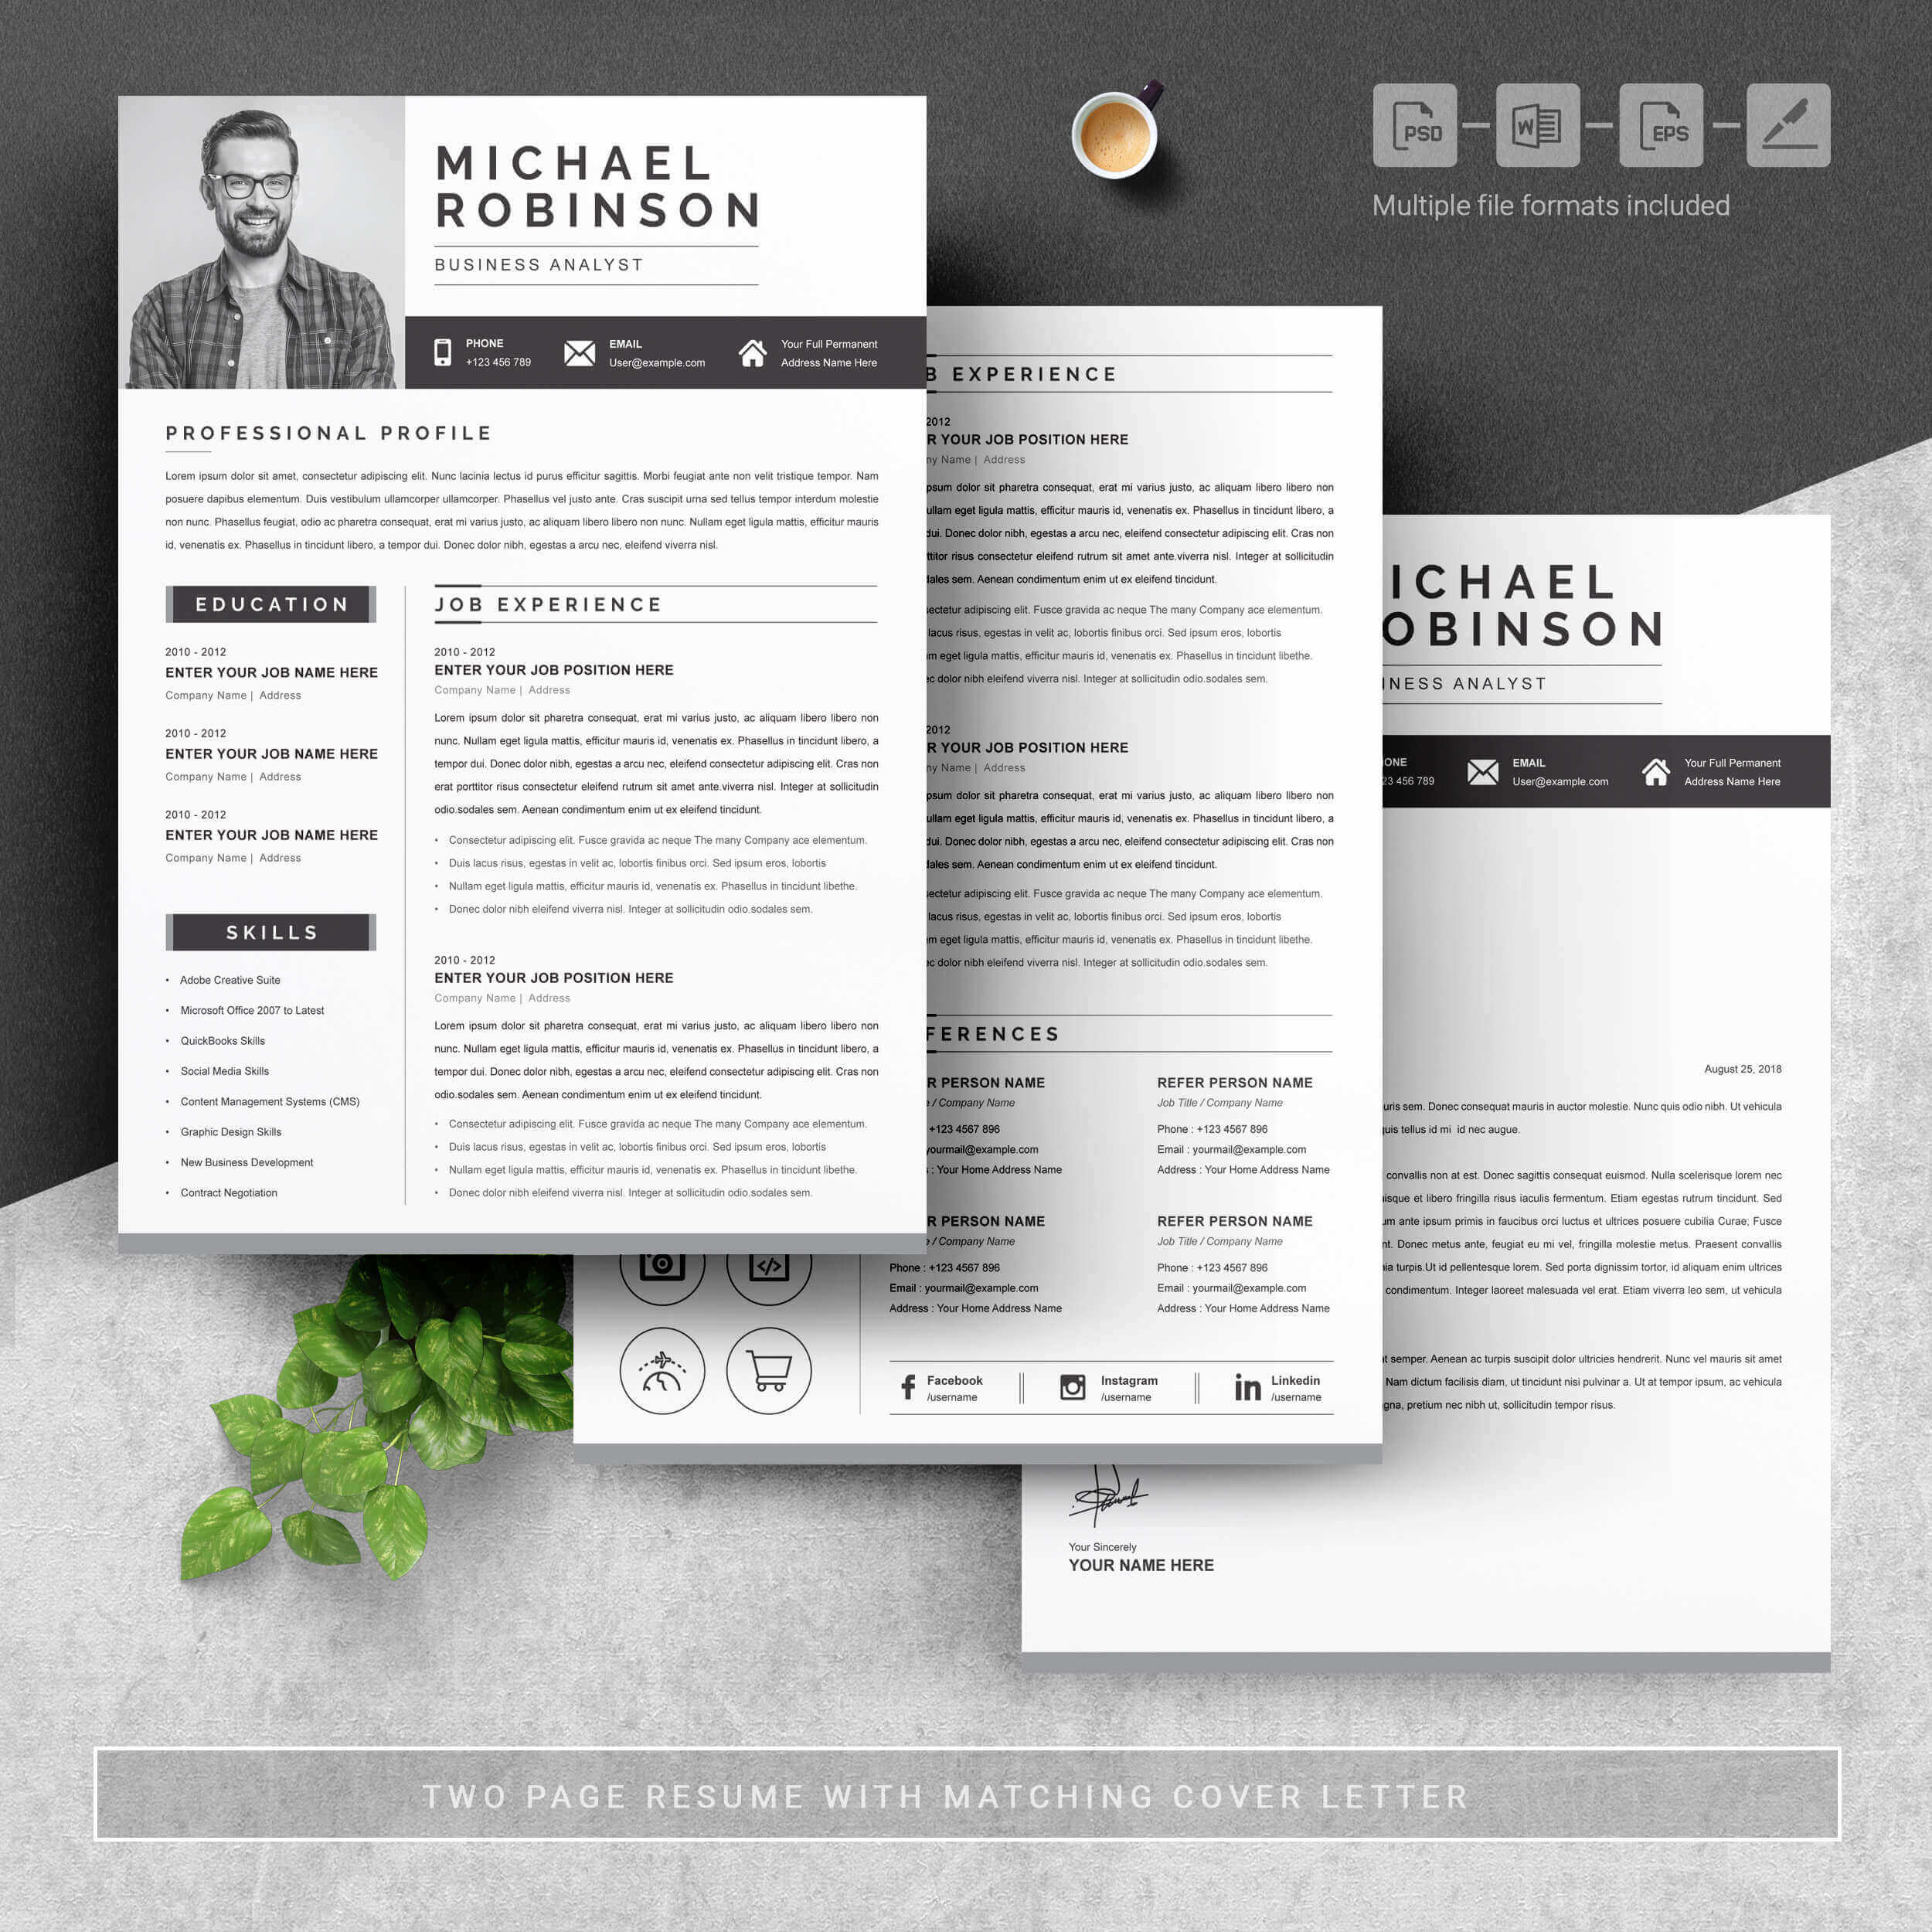 04 3 pages free resume design template 4 1 1 500